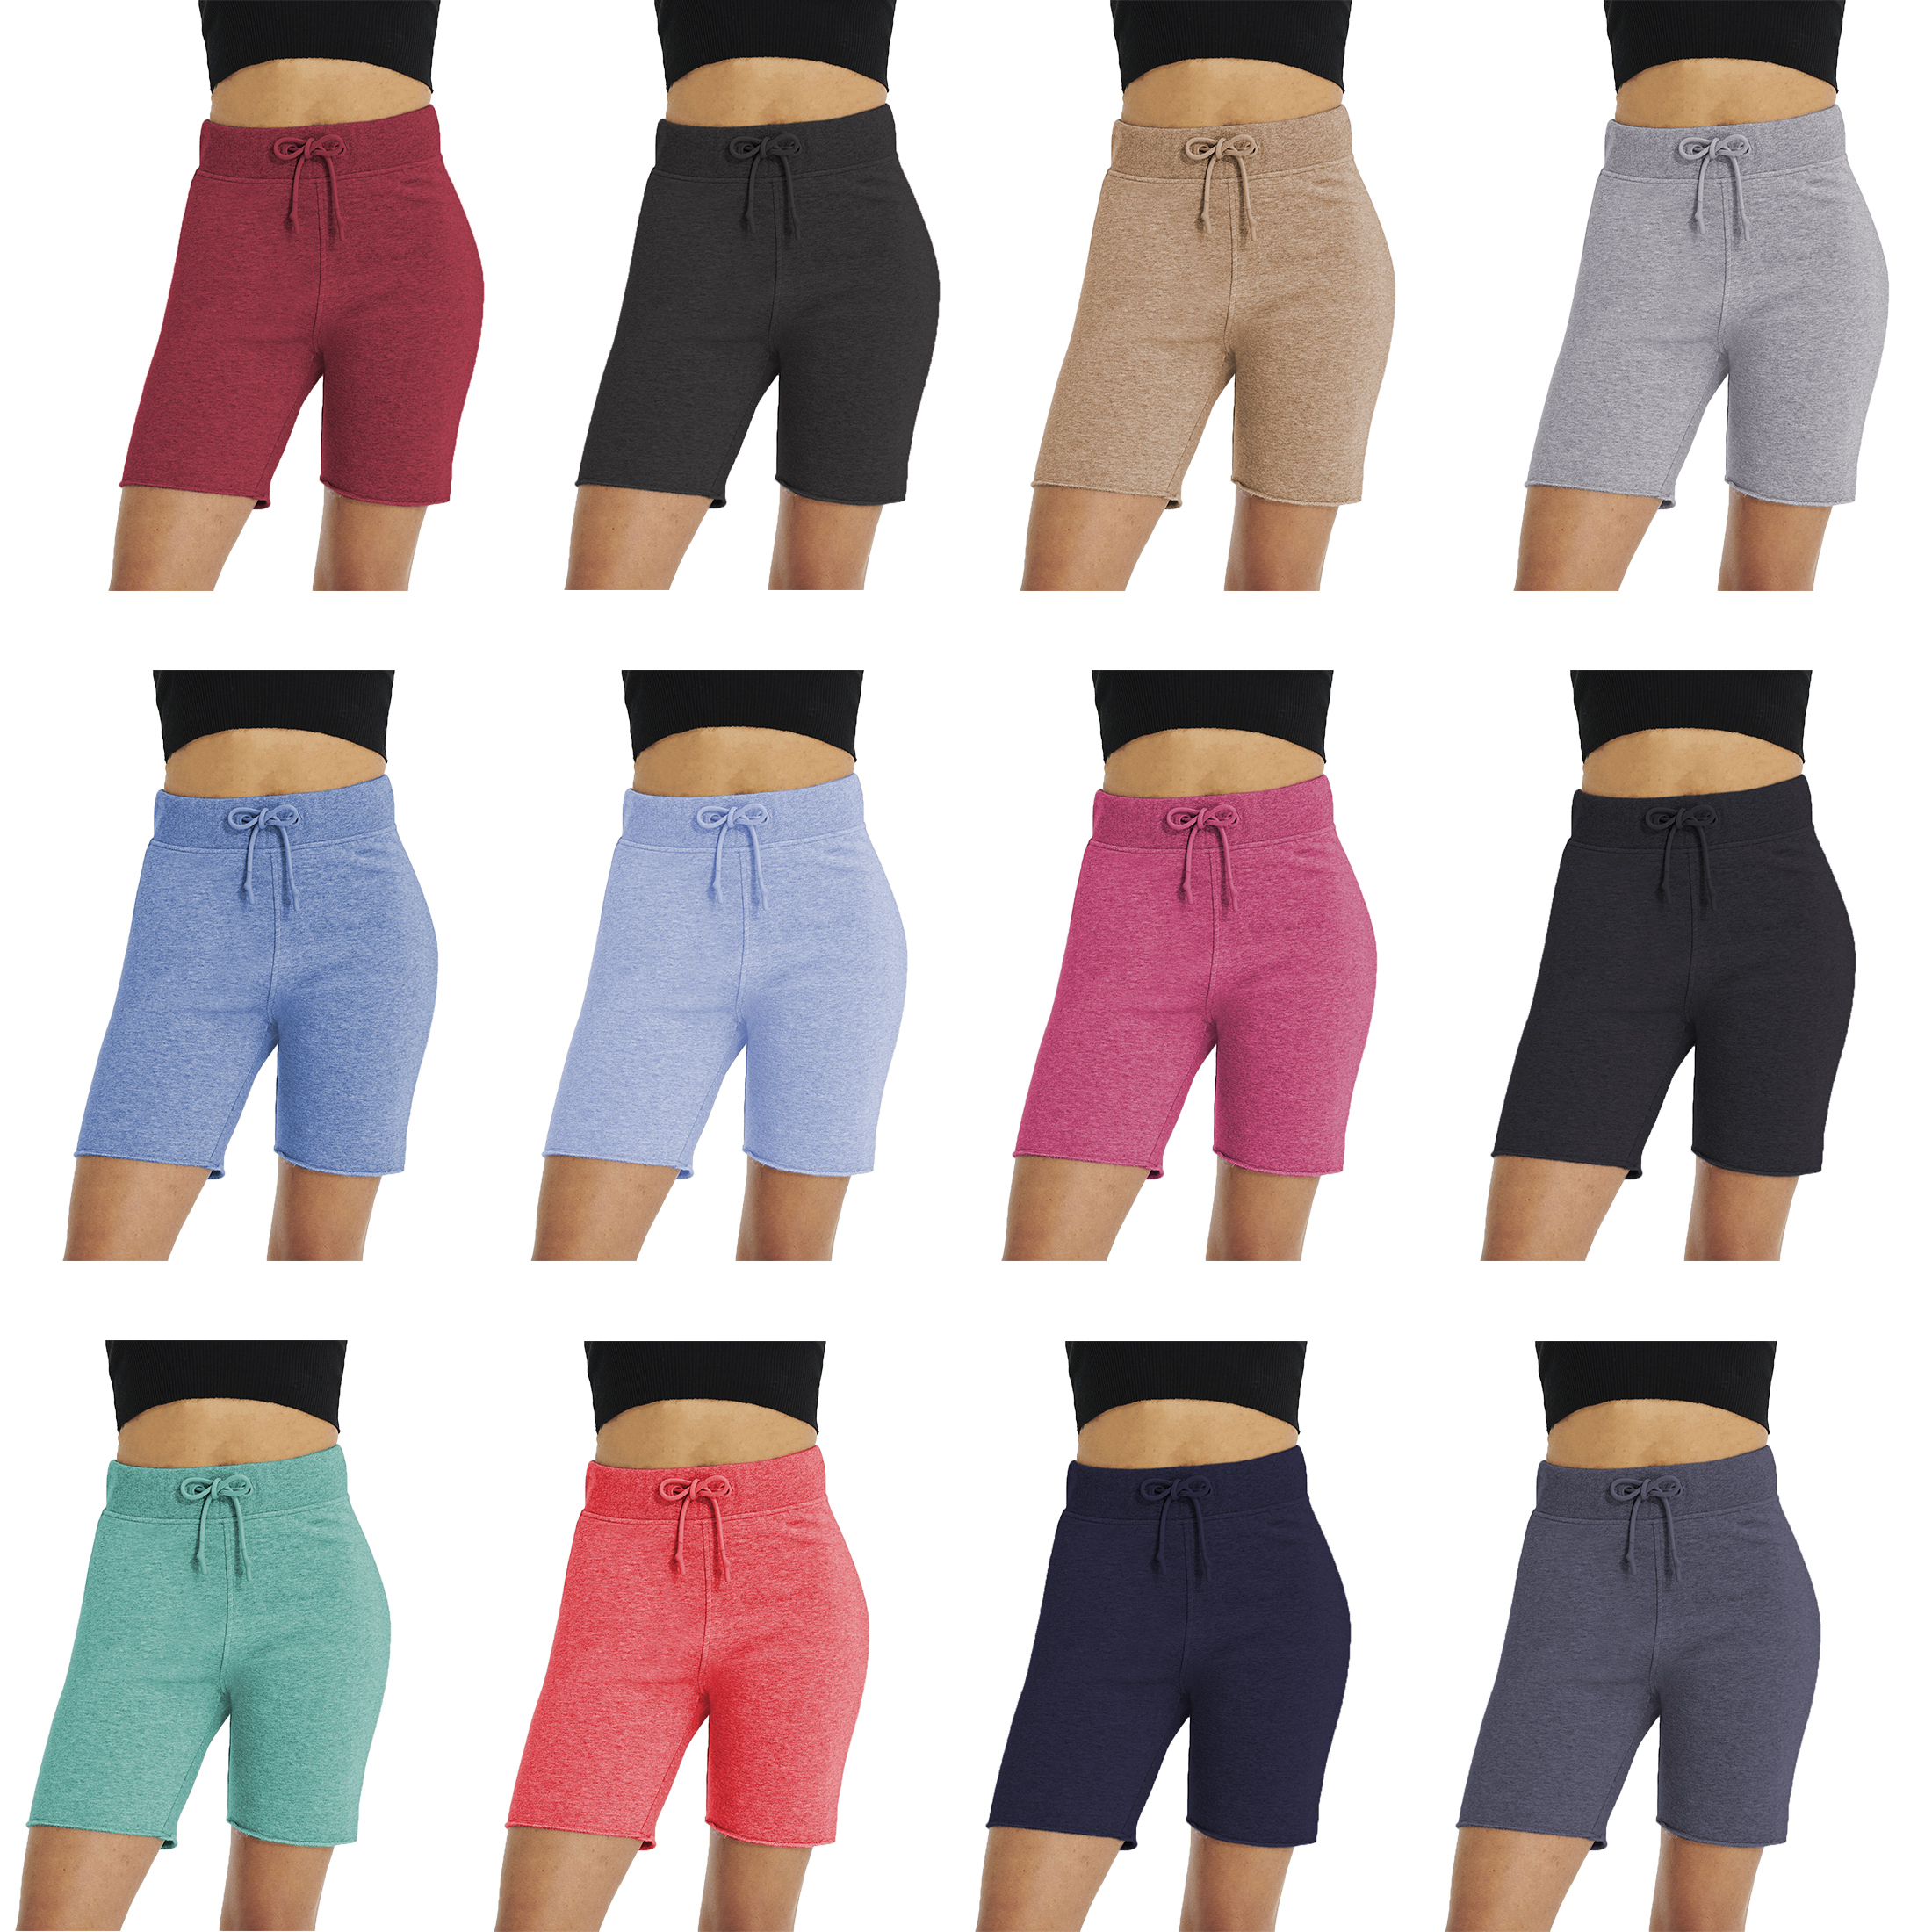 3-Pack: Ladies Soft Summer Stretch Active Athletic Lounge Sports Workout Bermuda Shorts - Small